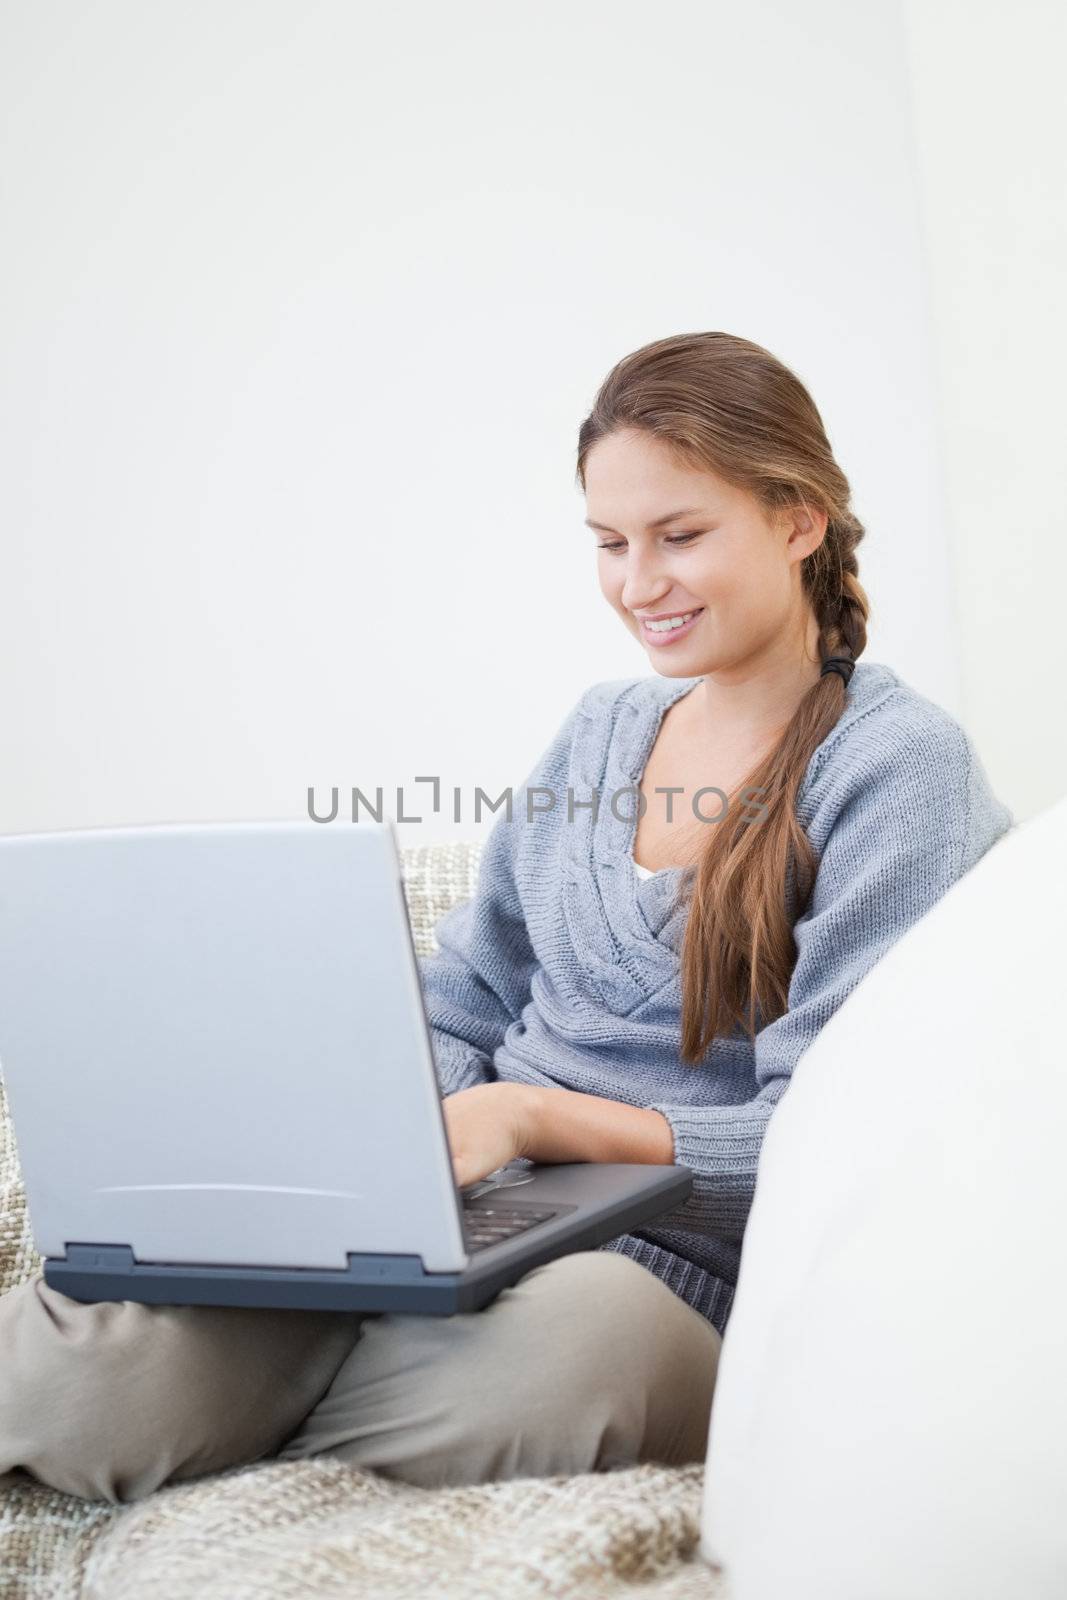 Women sitting while using a laptop by Wavebreakmedia